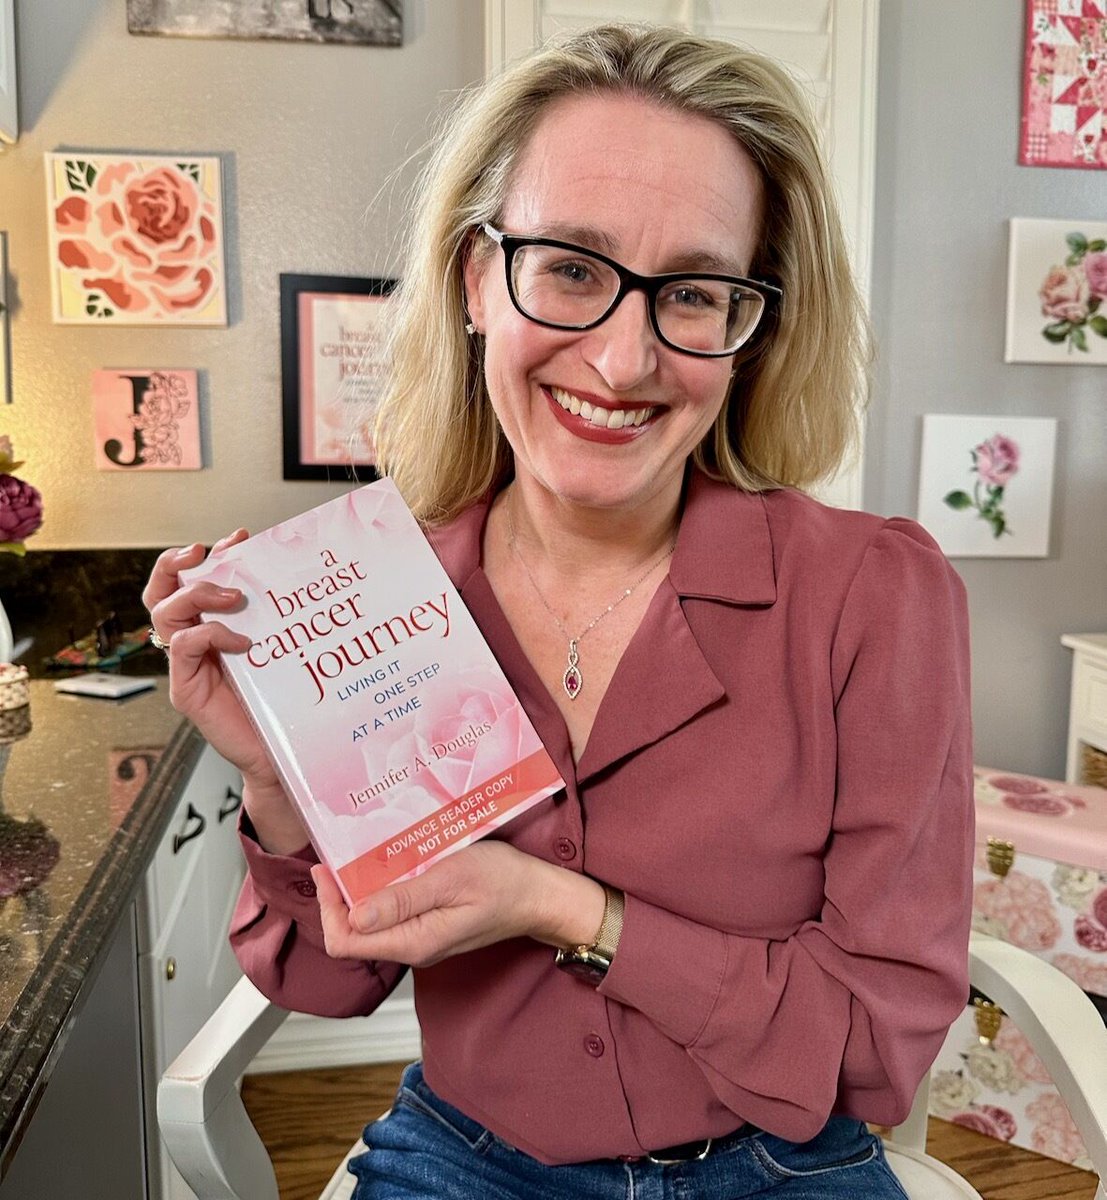 Receiving the first copies of my book was such a dream come true moment. In a good way. Unlike the actual process of going through breast cancer. Which was not at all fun. #bcsm jenniferadouglas.com/books